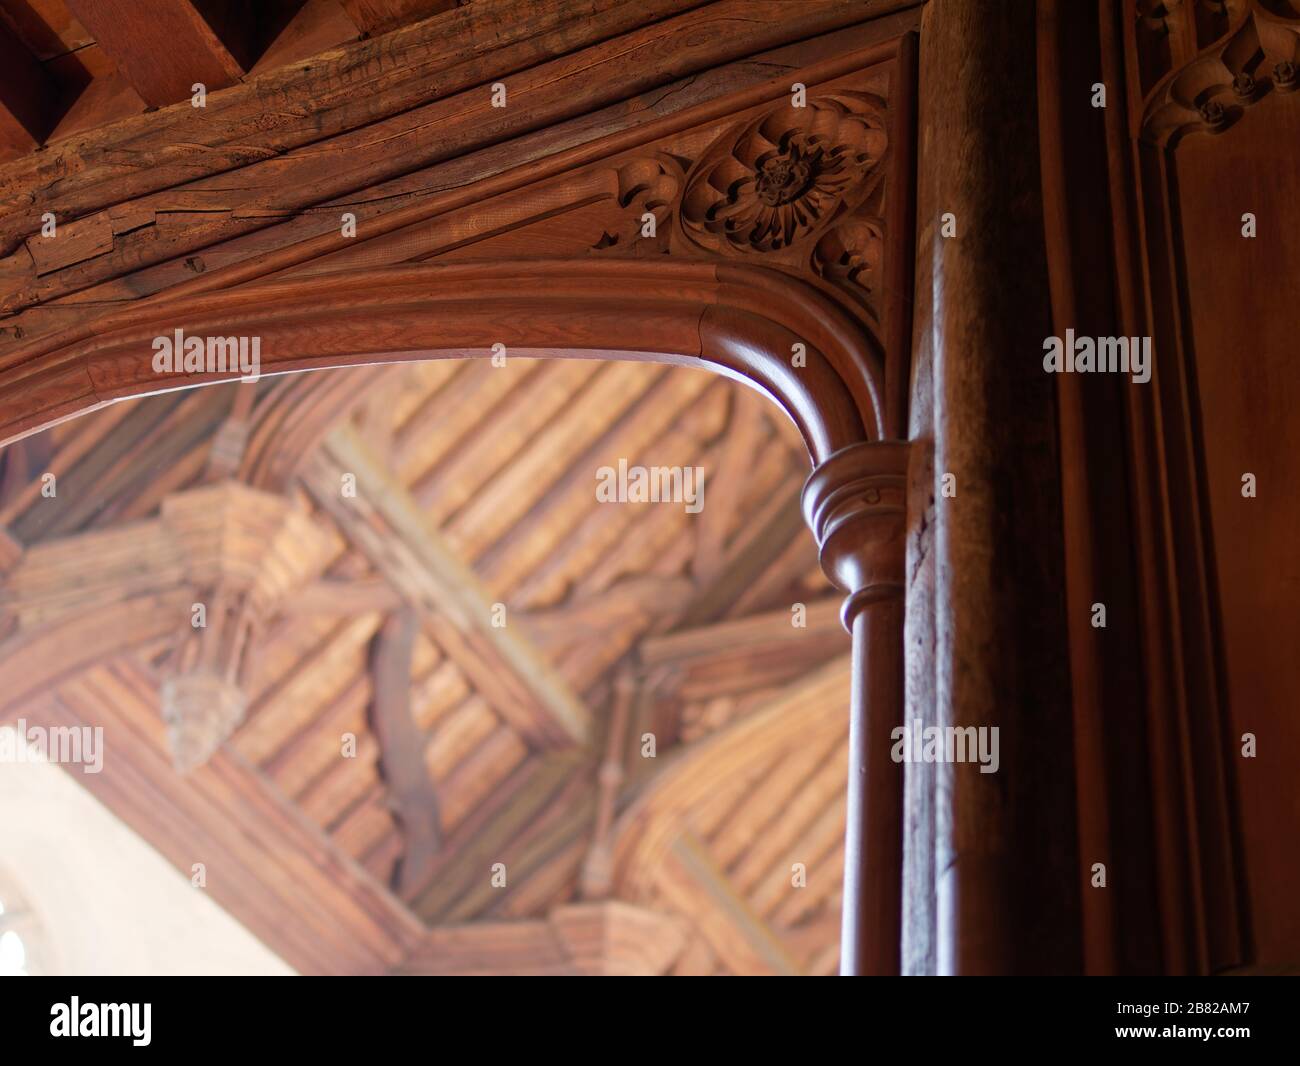 Detail of wooden decorative spandrel in the Great Hall, Eltham Palace. Hammerbeam roof in the background. Stock Photo